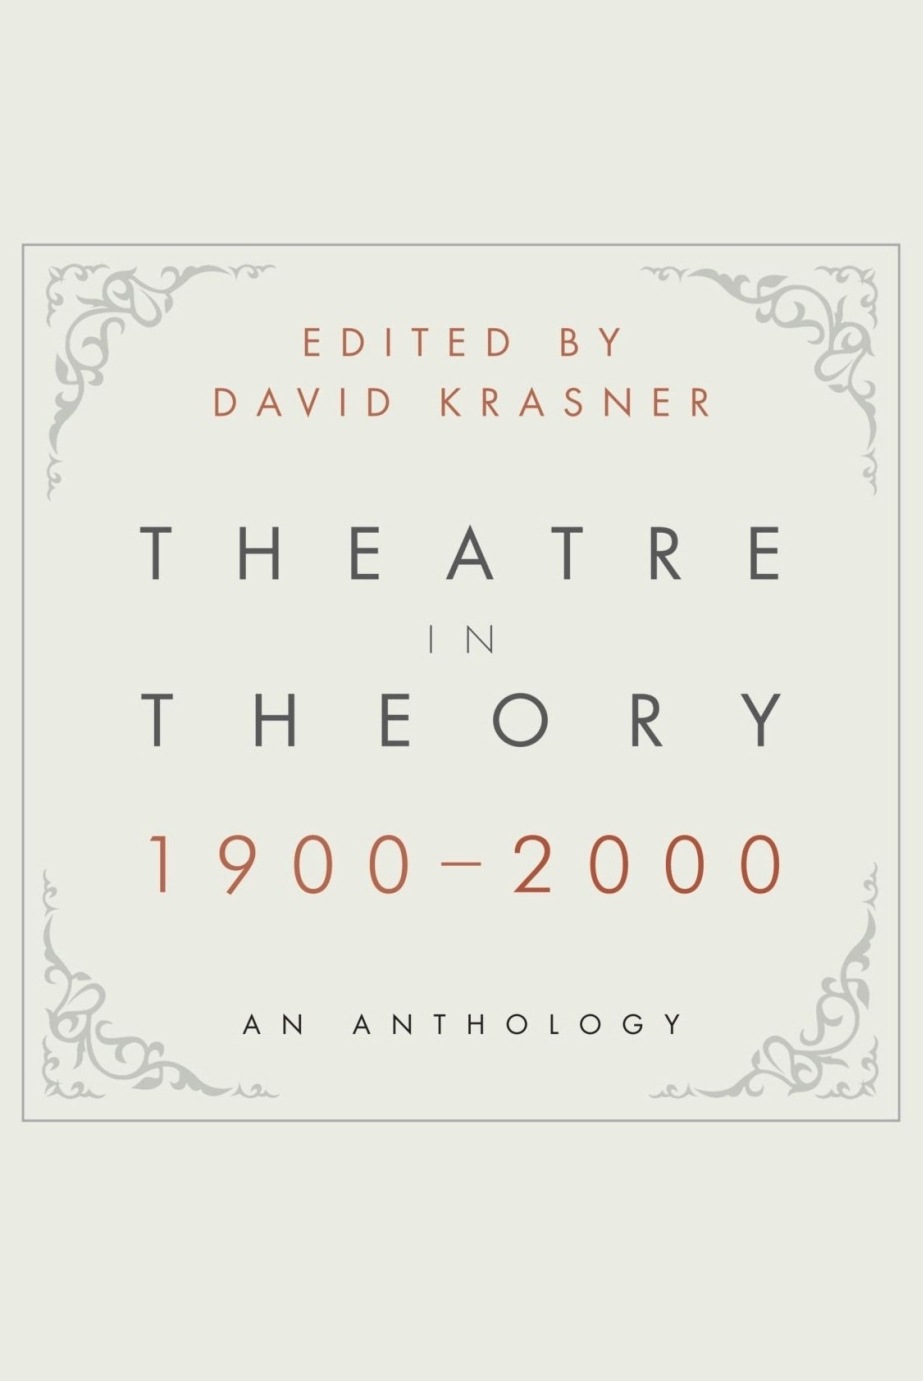 Theatre-in-Theory-1900-2000